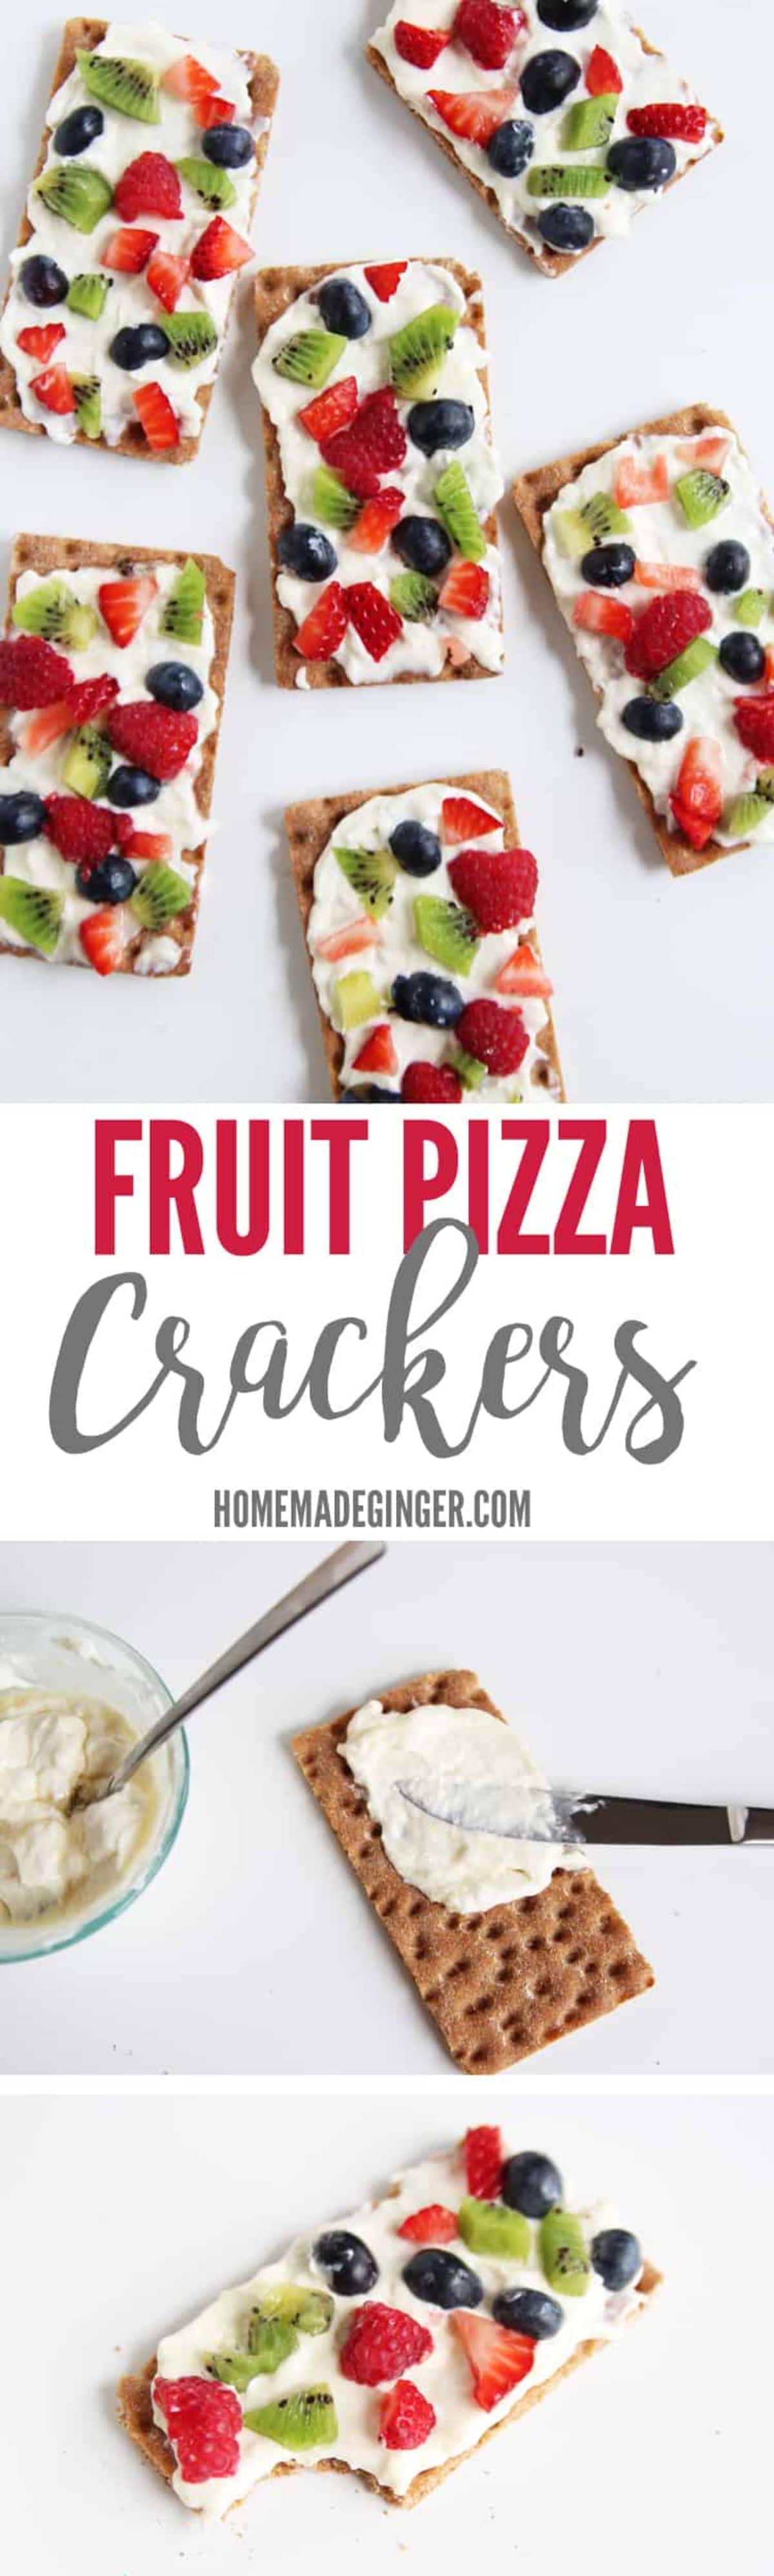 the text reads "Fruit piza crackers" The image is of ryvita crackers topped with yoghurt and fruit pieces